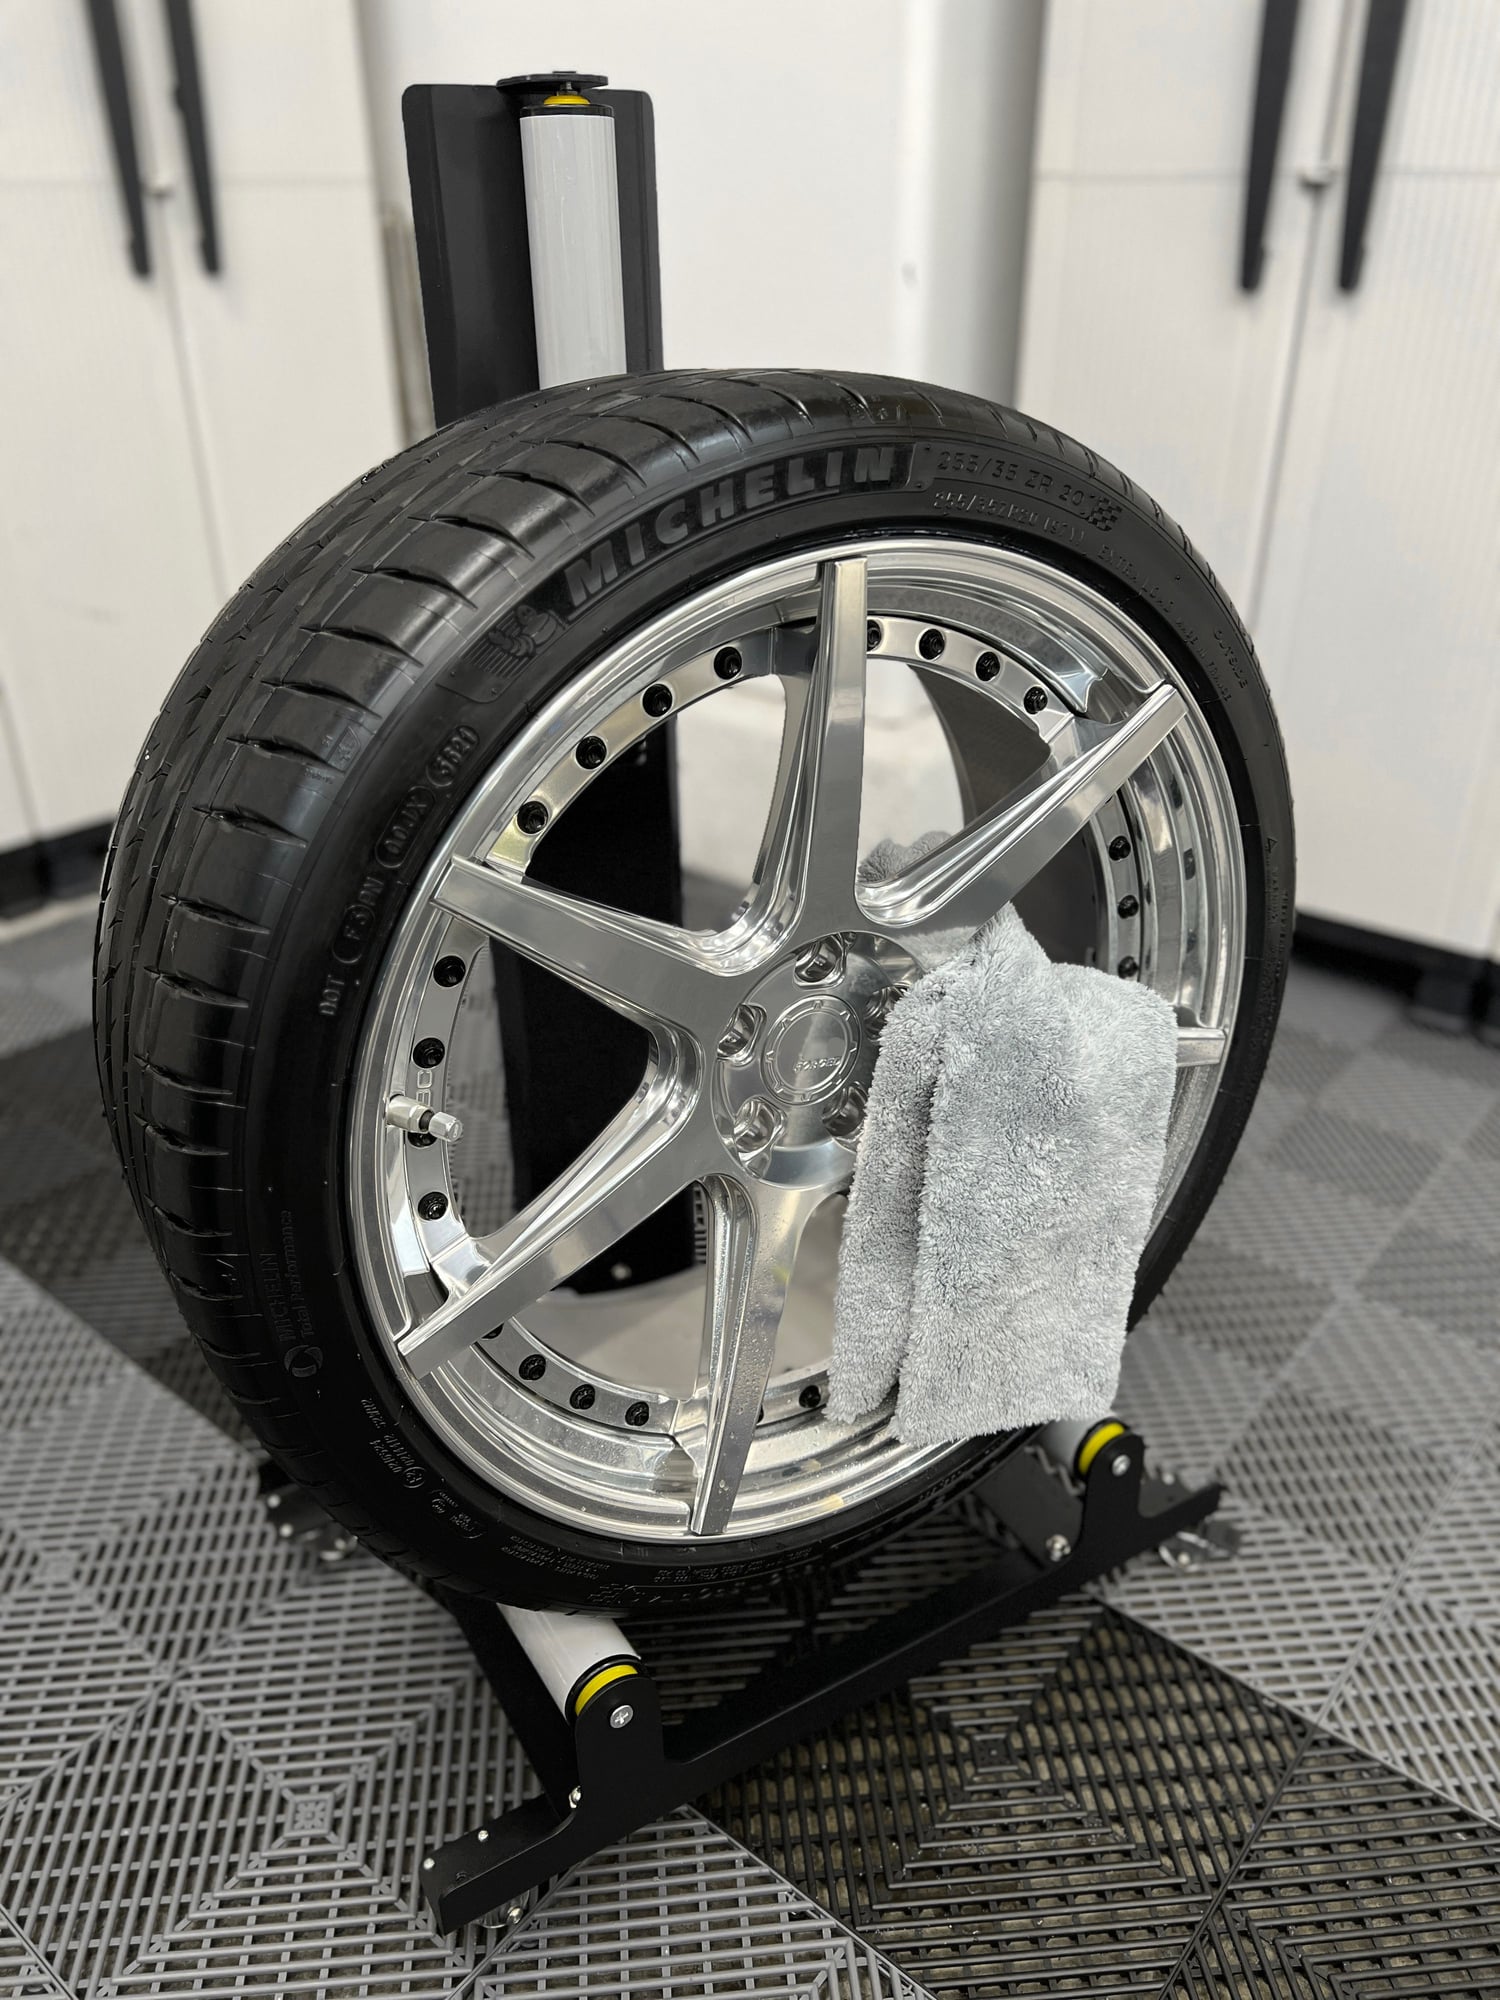 Steering/Suspension - [New in Box] Wheel & Tire Car Detailing Stand for Cleaning, Detailing, and Polishing - New - 0  All Models - Pleasanton, CA 94566, United States